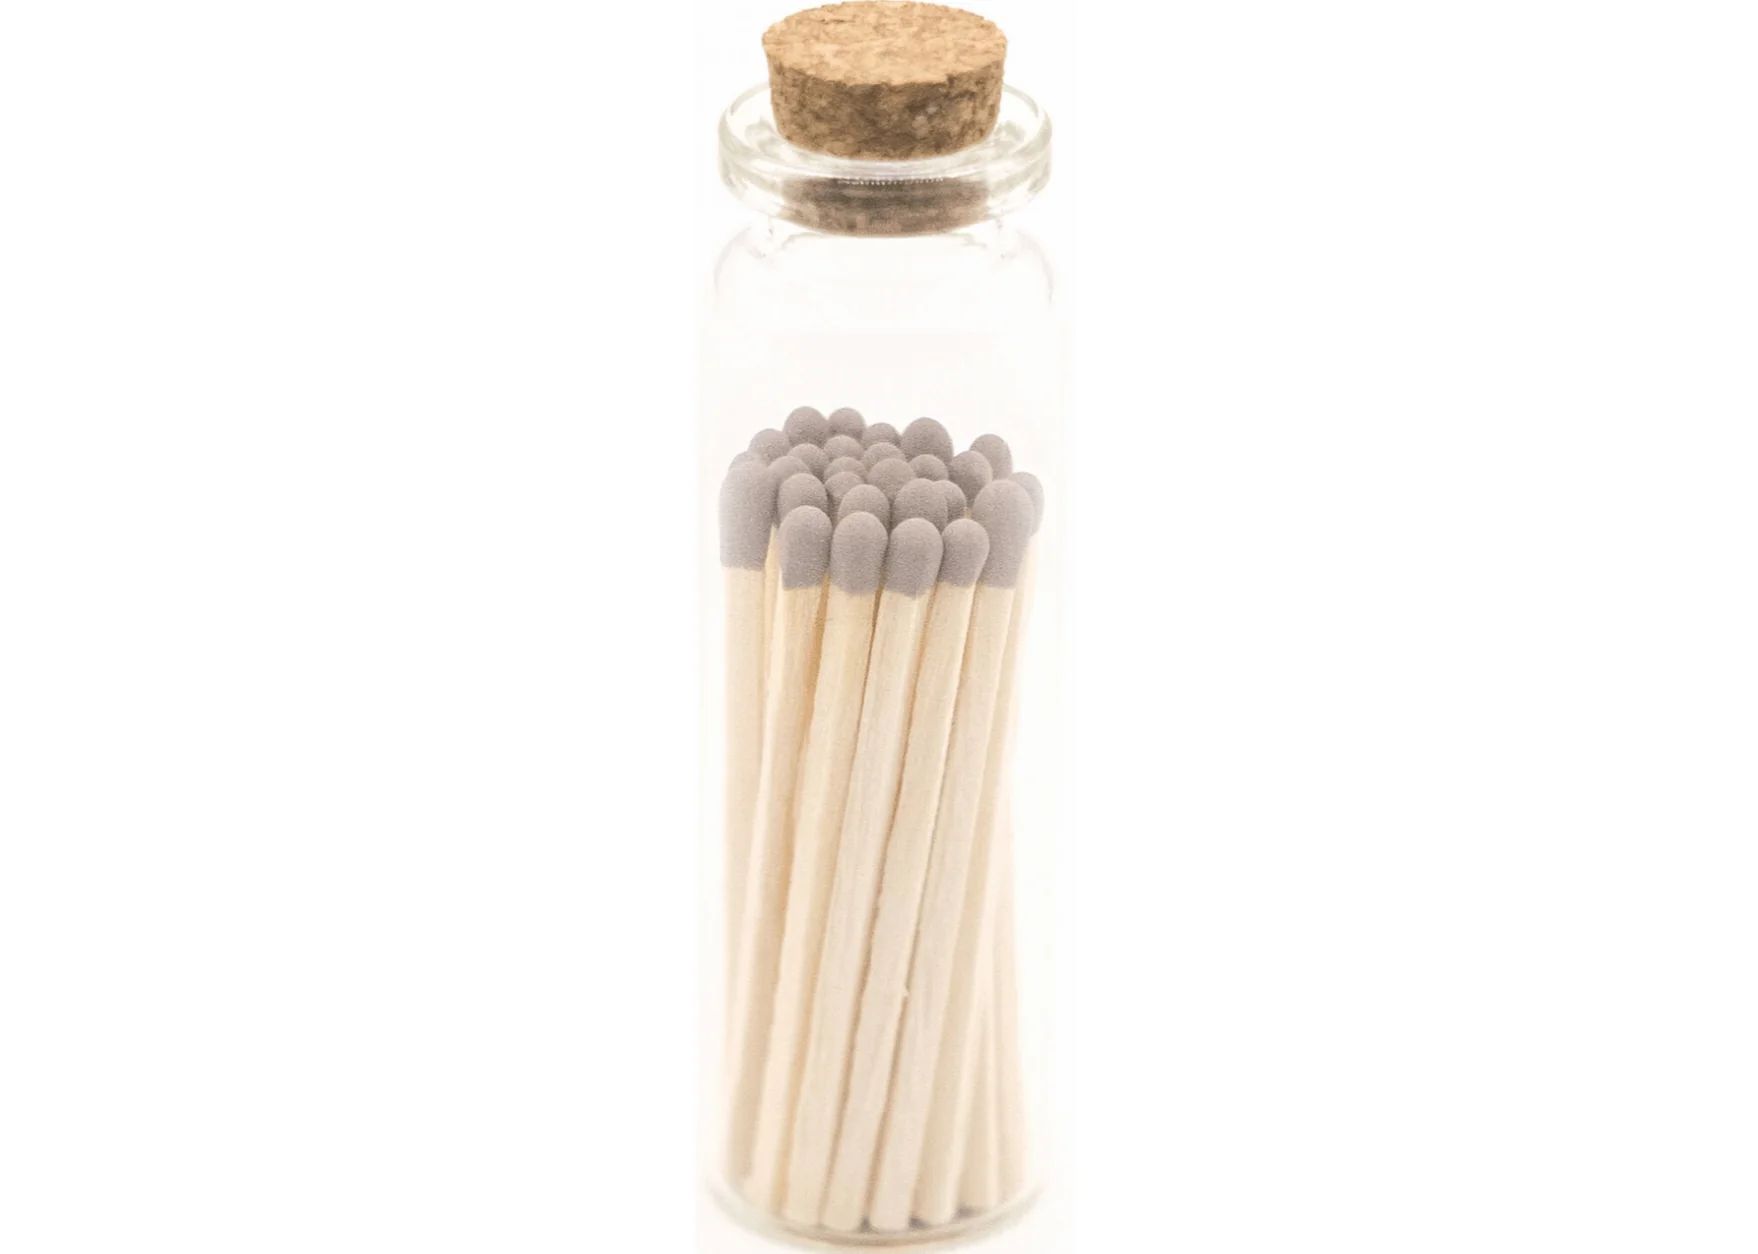 Gray Tip Matches in a Jar | Foundation Goods